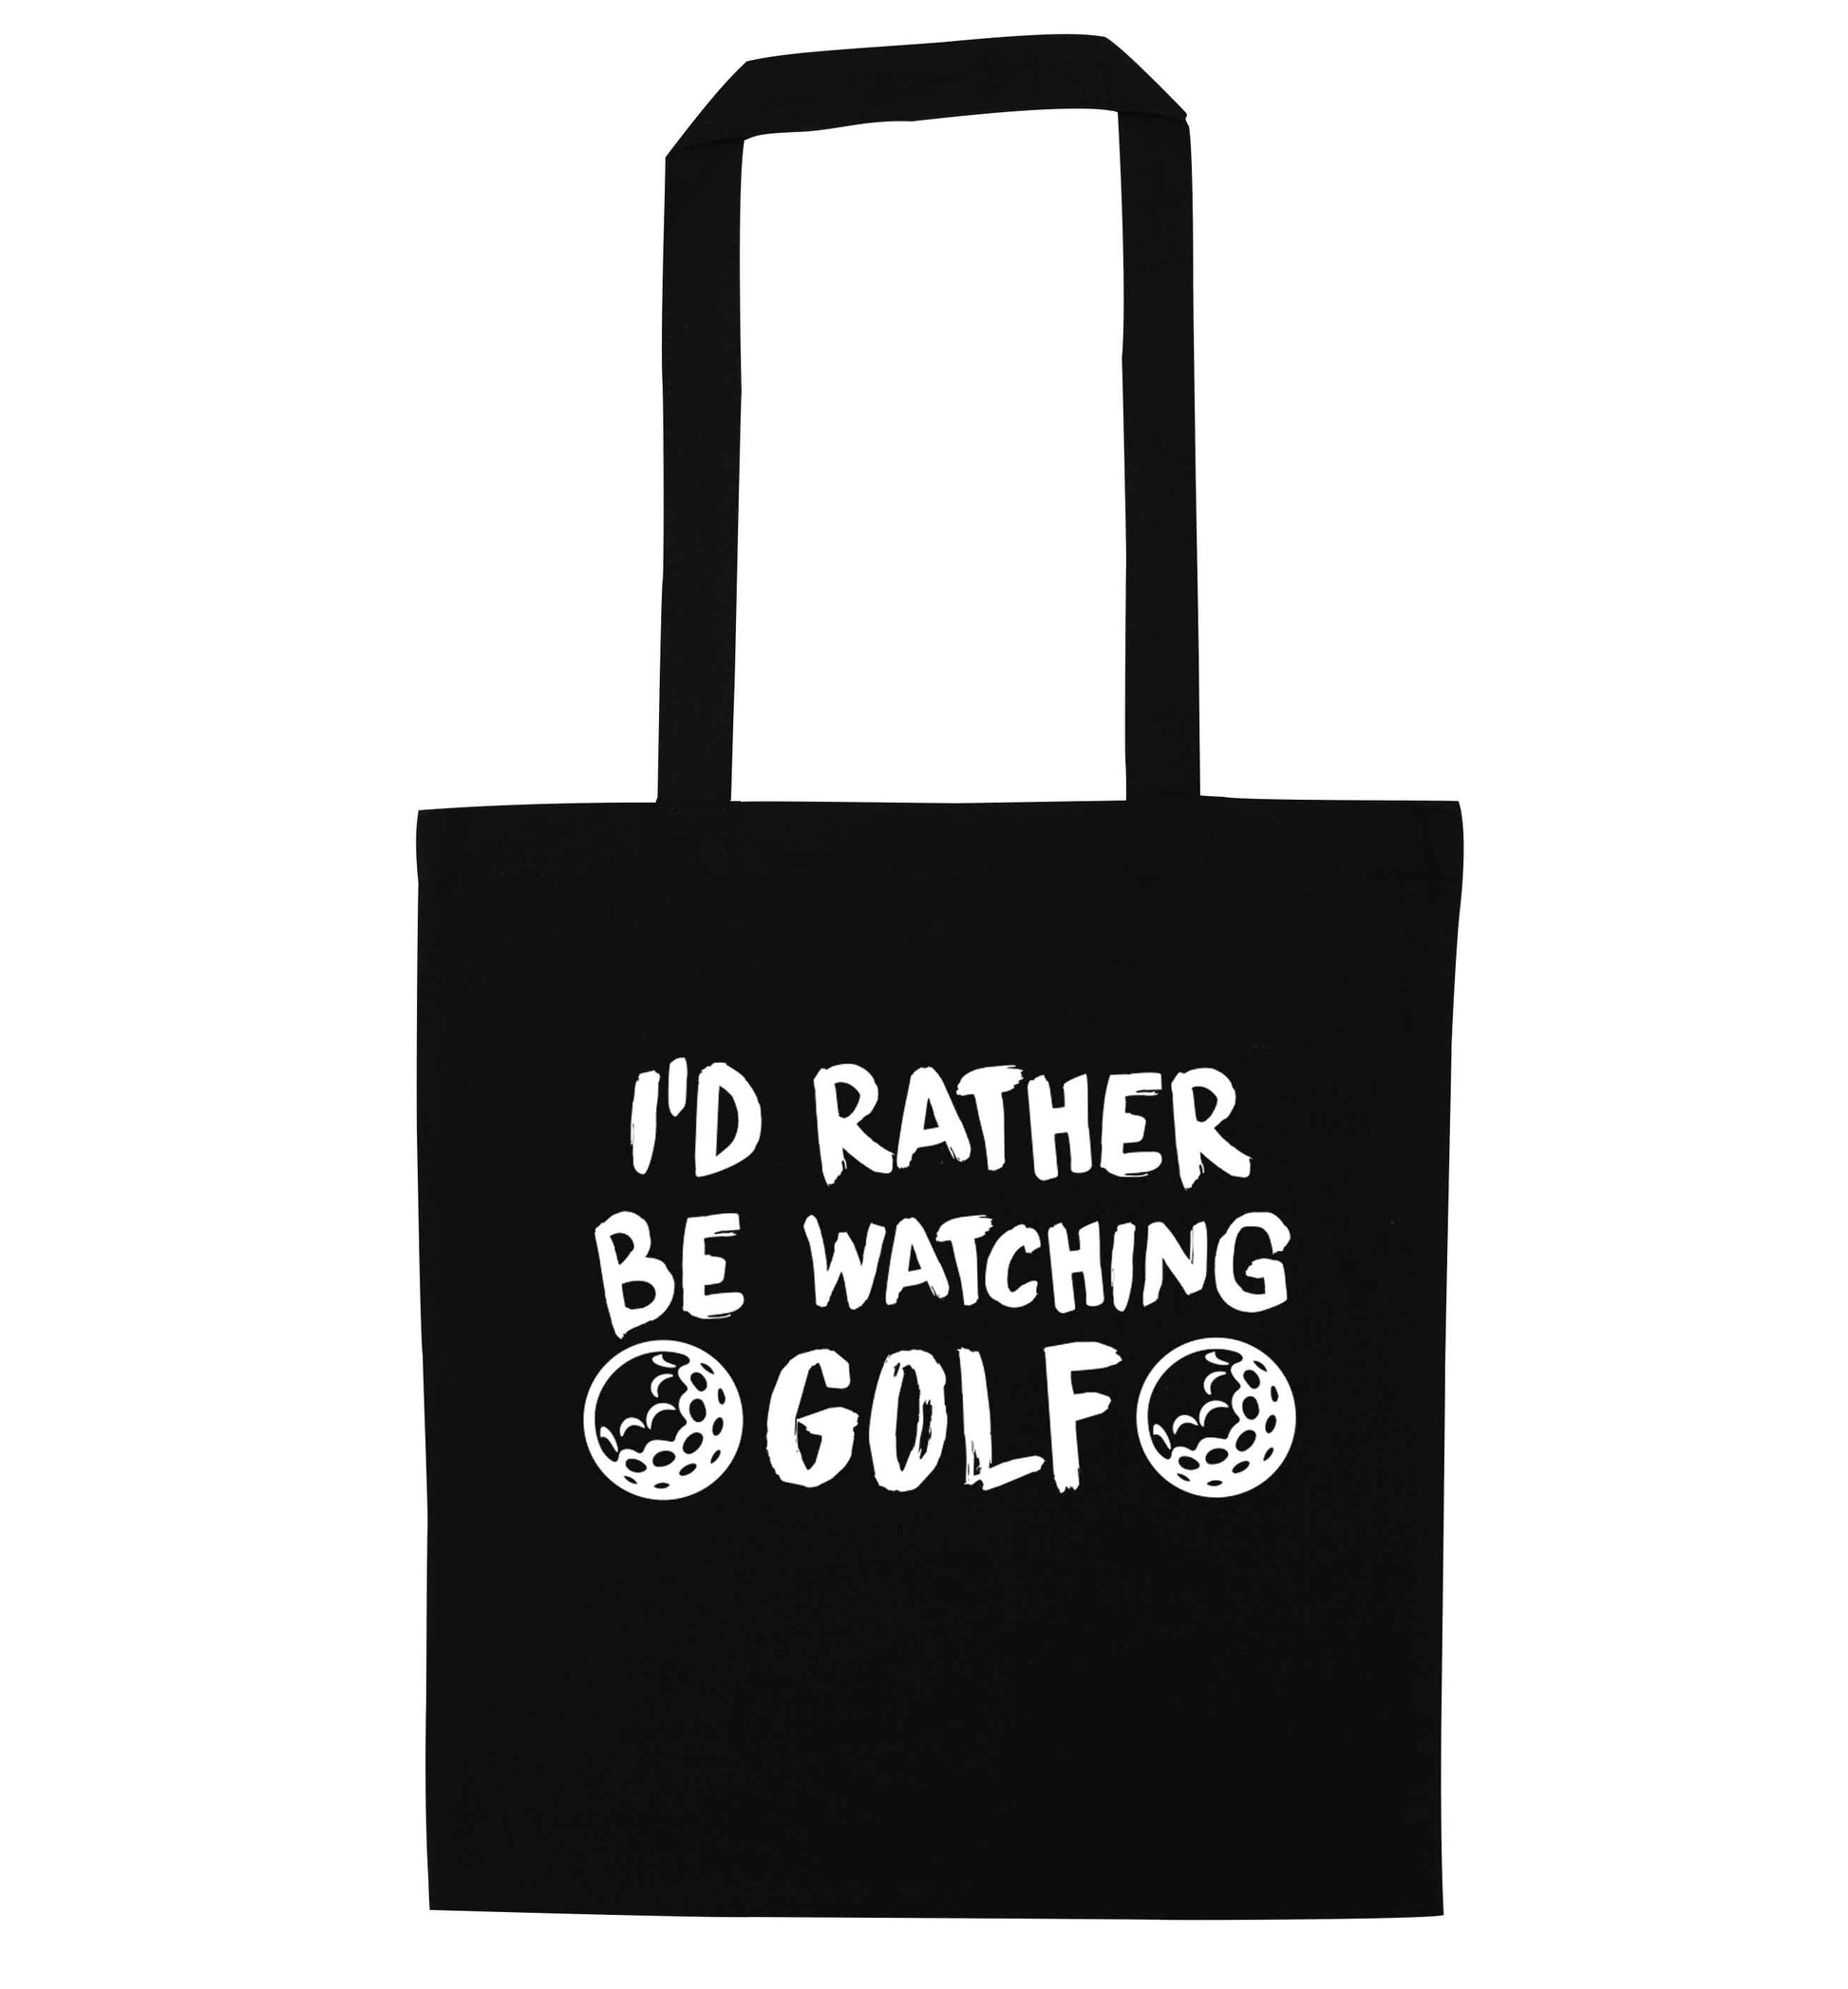 I'd rather be watching golf black tote bag